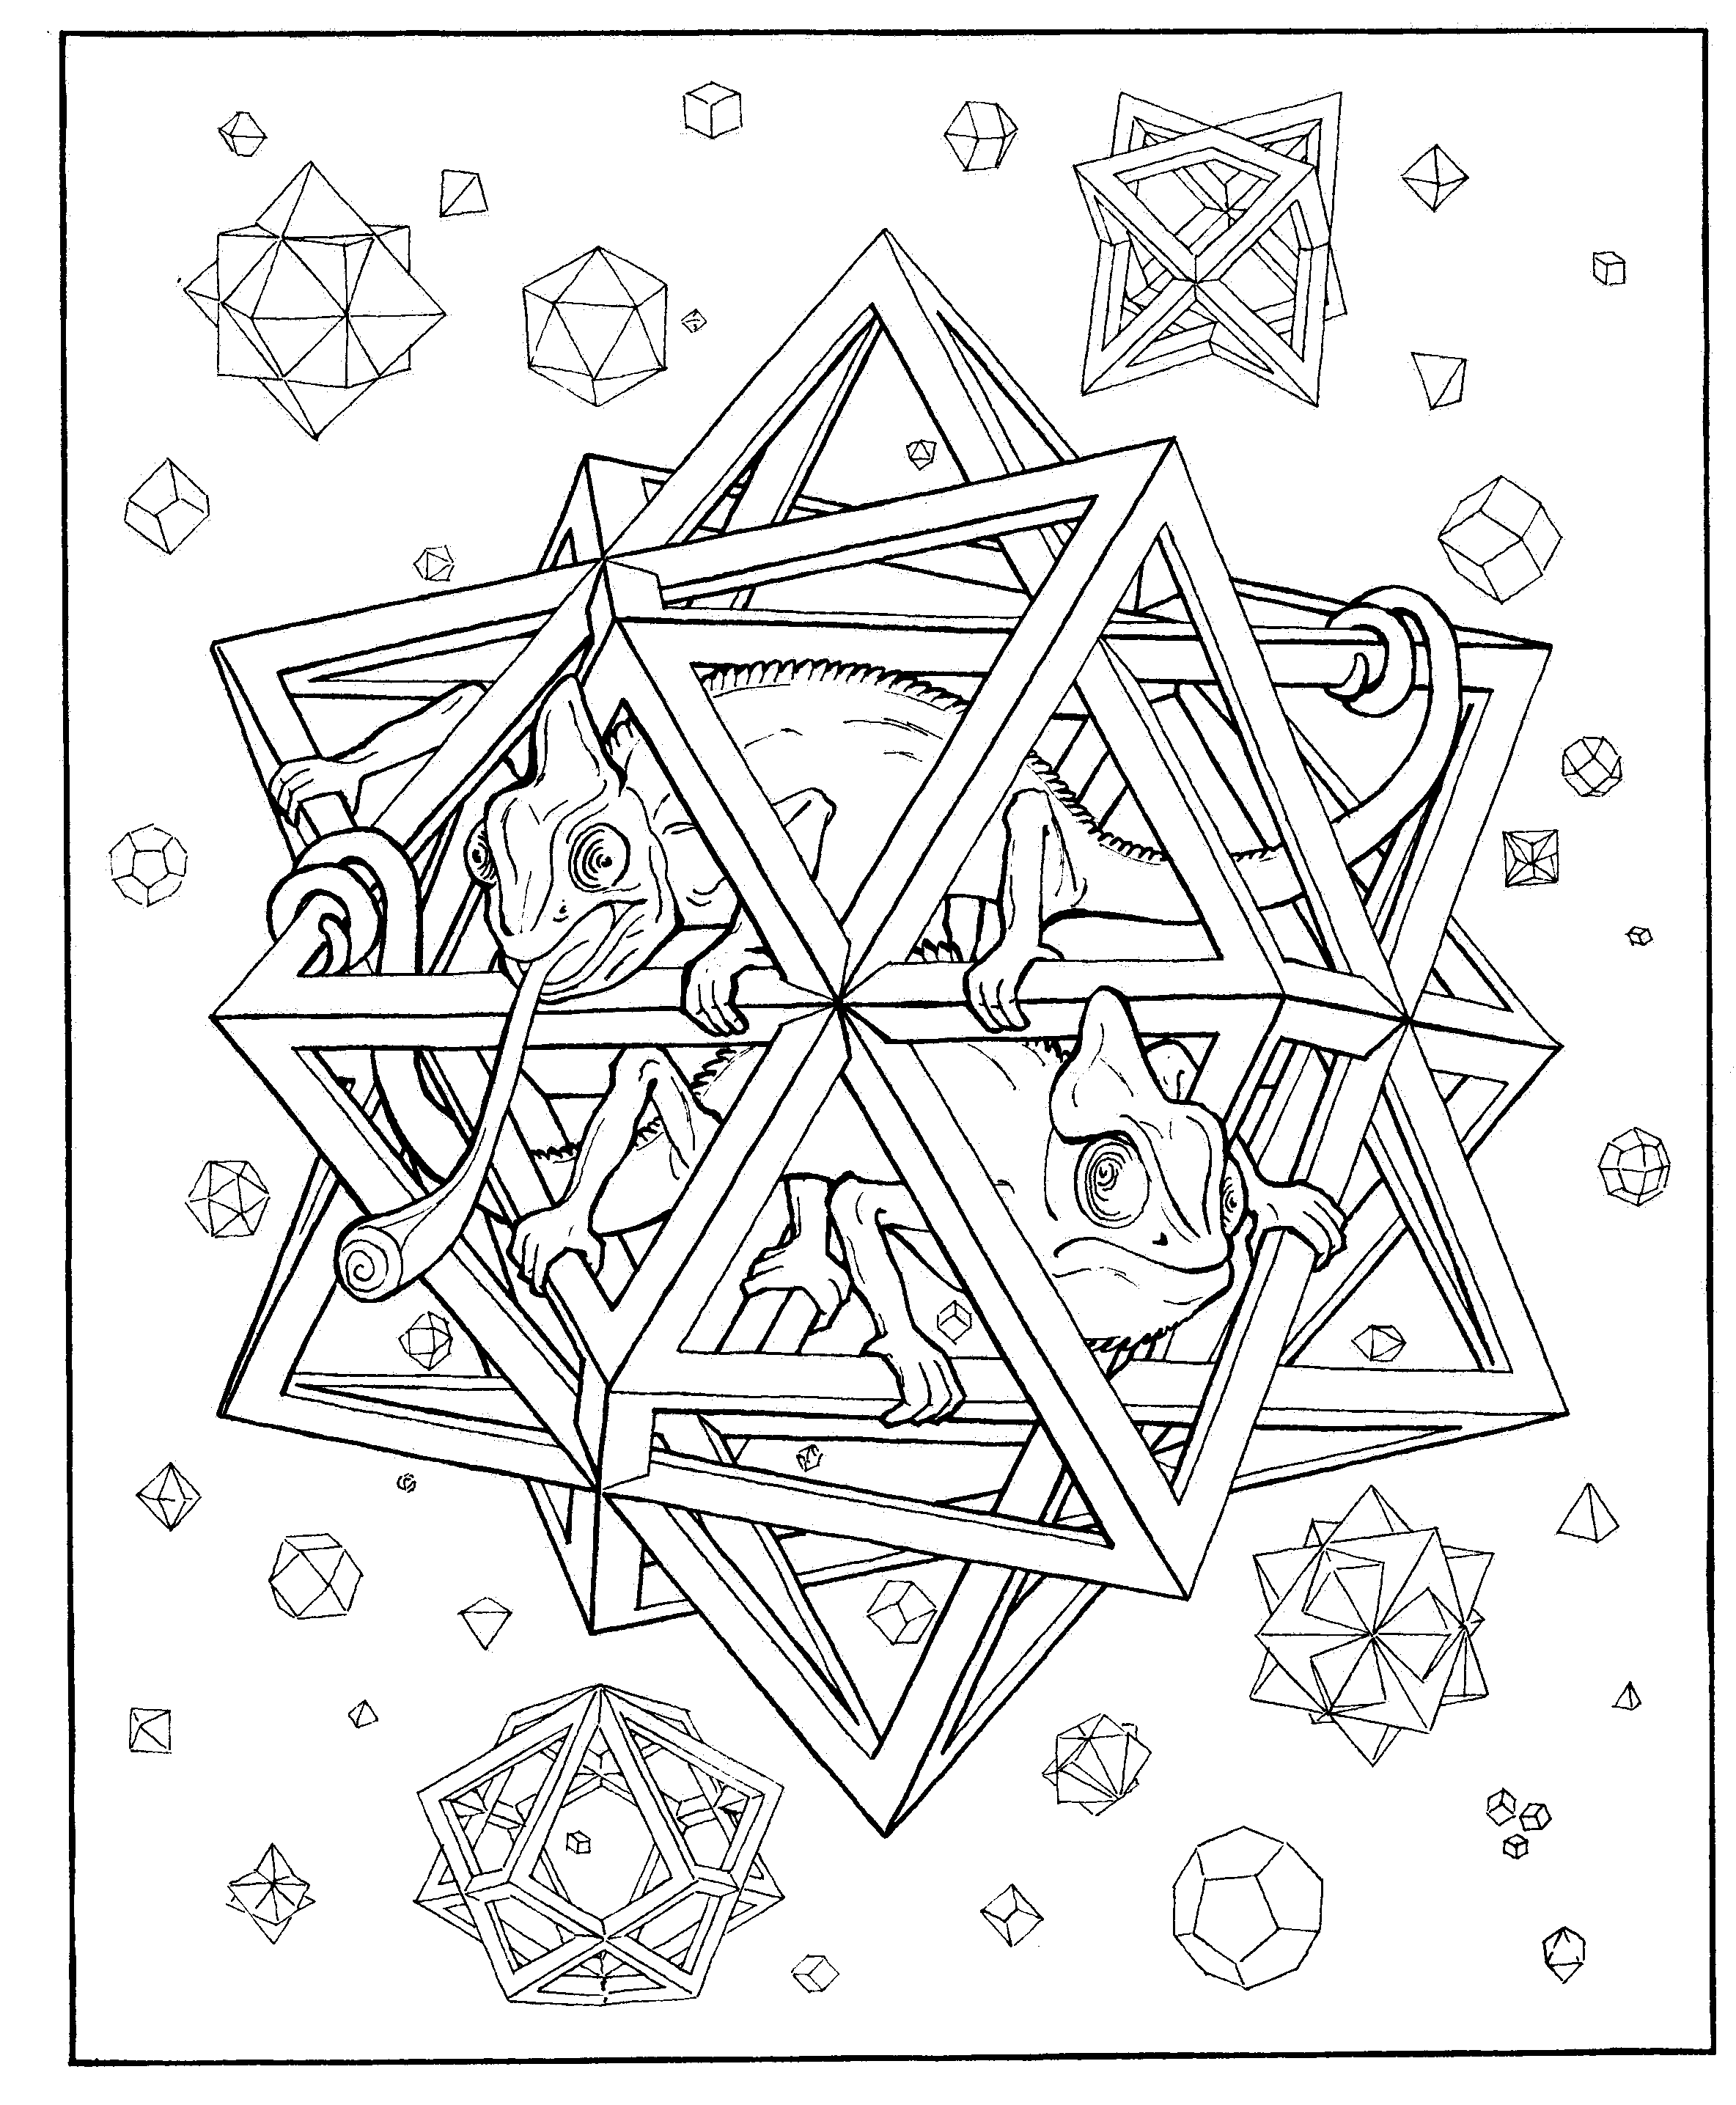 Free Geometric Coloring Pages #6899 Geometric Pattern Coloring ...